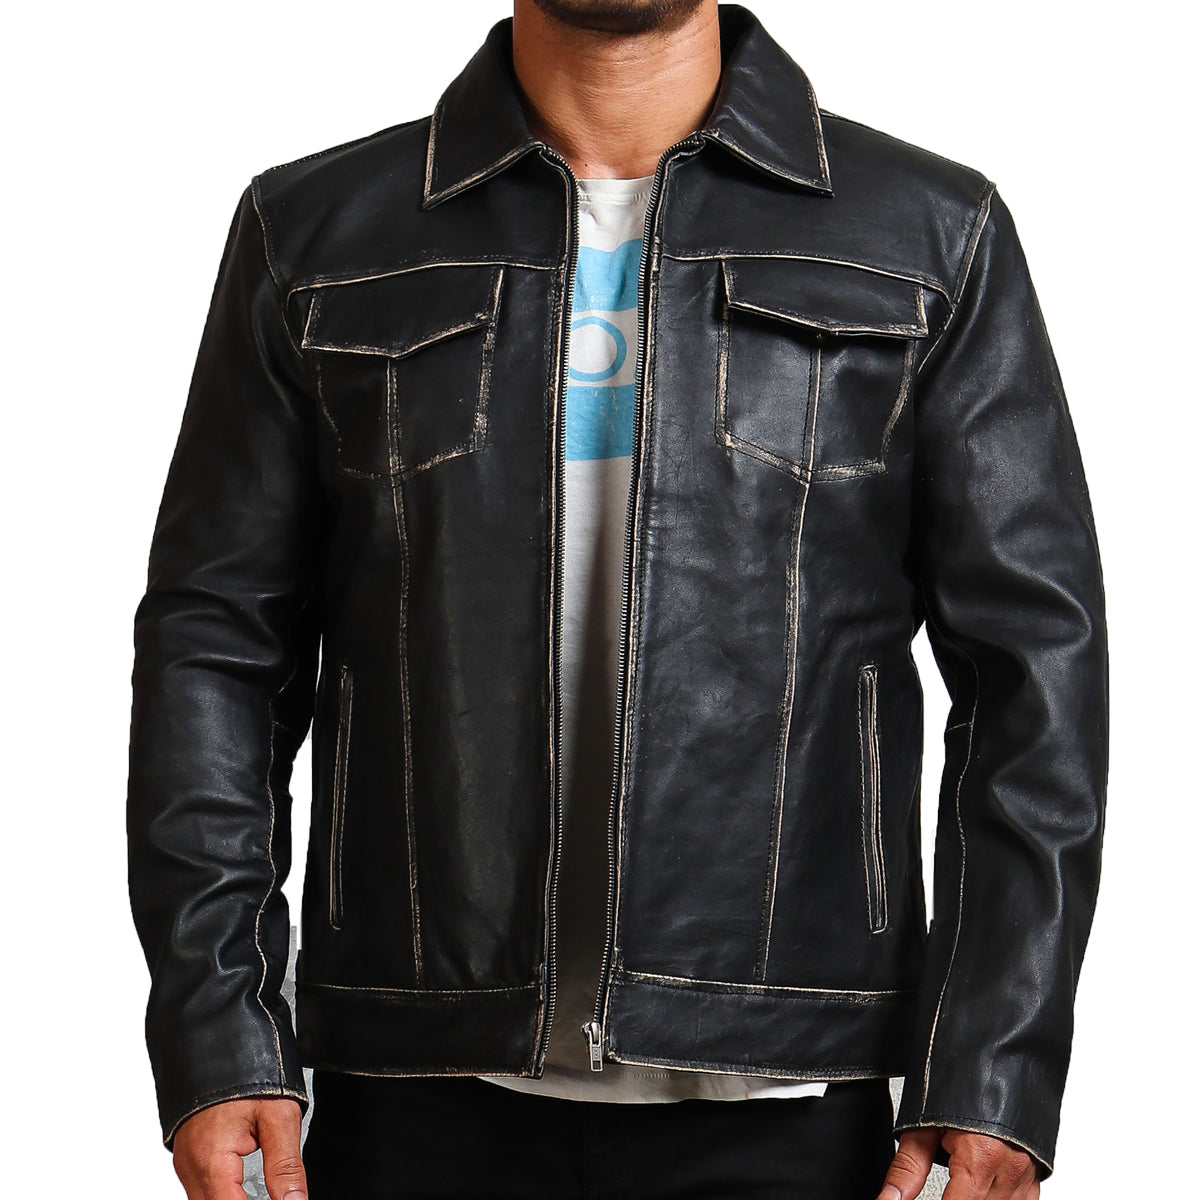 Trucker Leather Jacket With Distressed Finishing